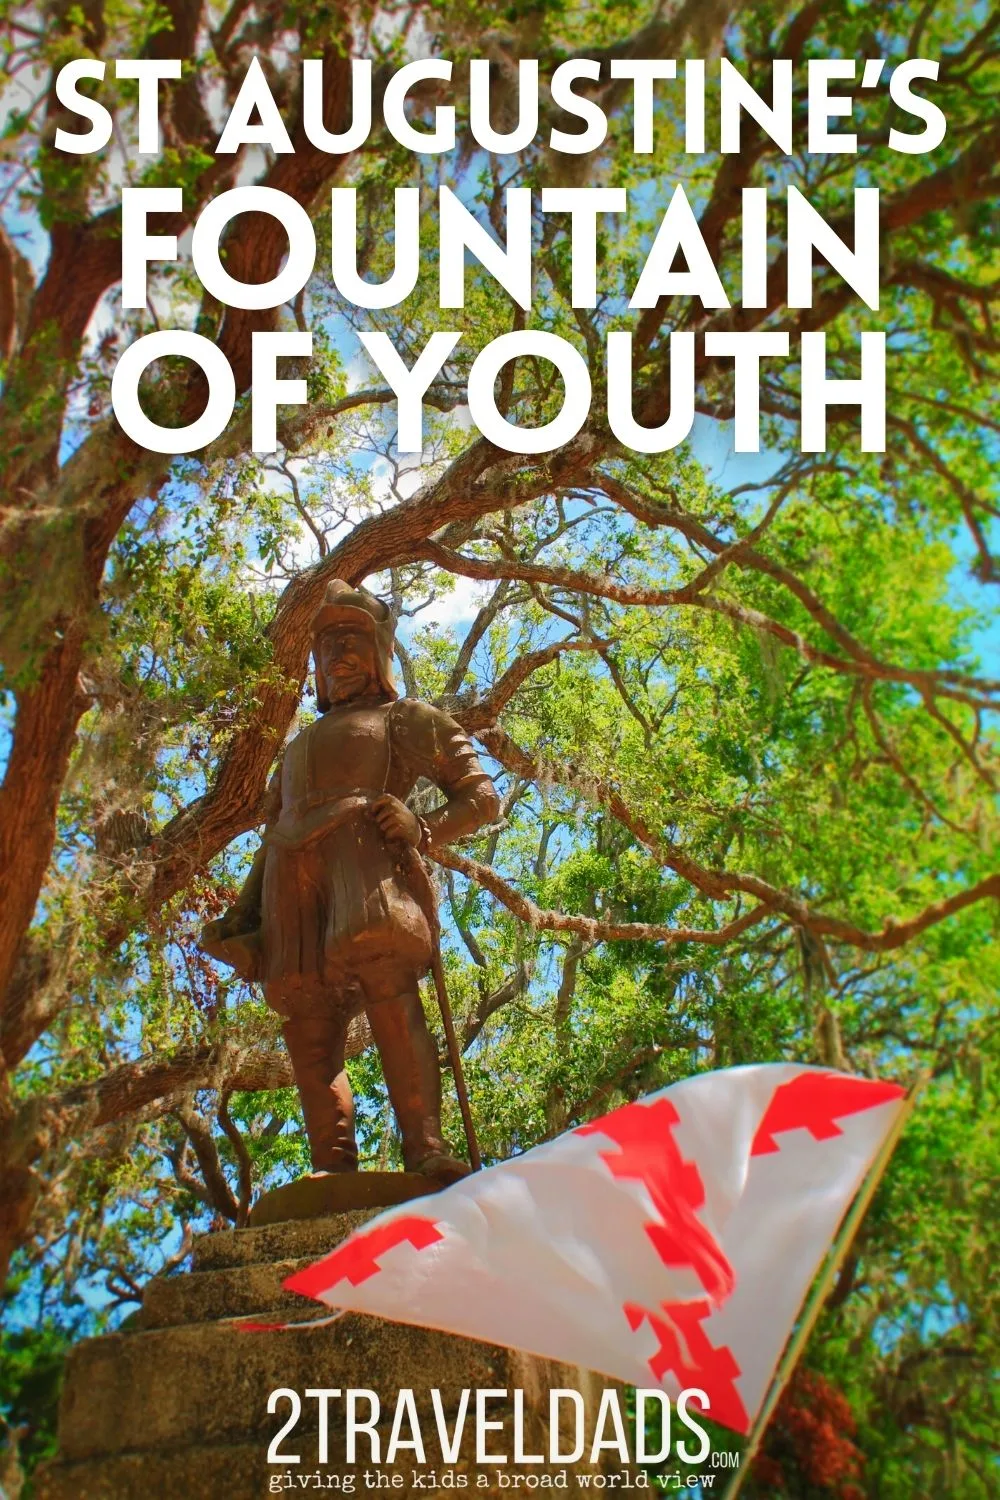 While it may not keep you forever young, the Fountain of Youth in St Augustine is two parts archeological site, 1 part tourist attraction and many parts mystery. Cloaked in the legend of Ponce De Leon, this beautiful park on the water is a must stop.  